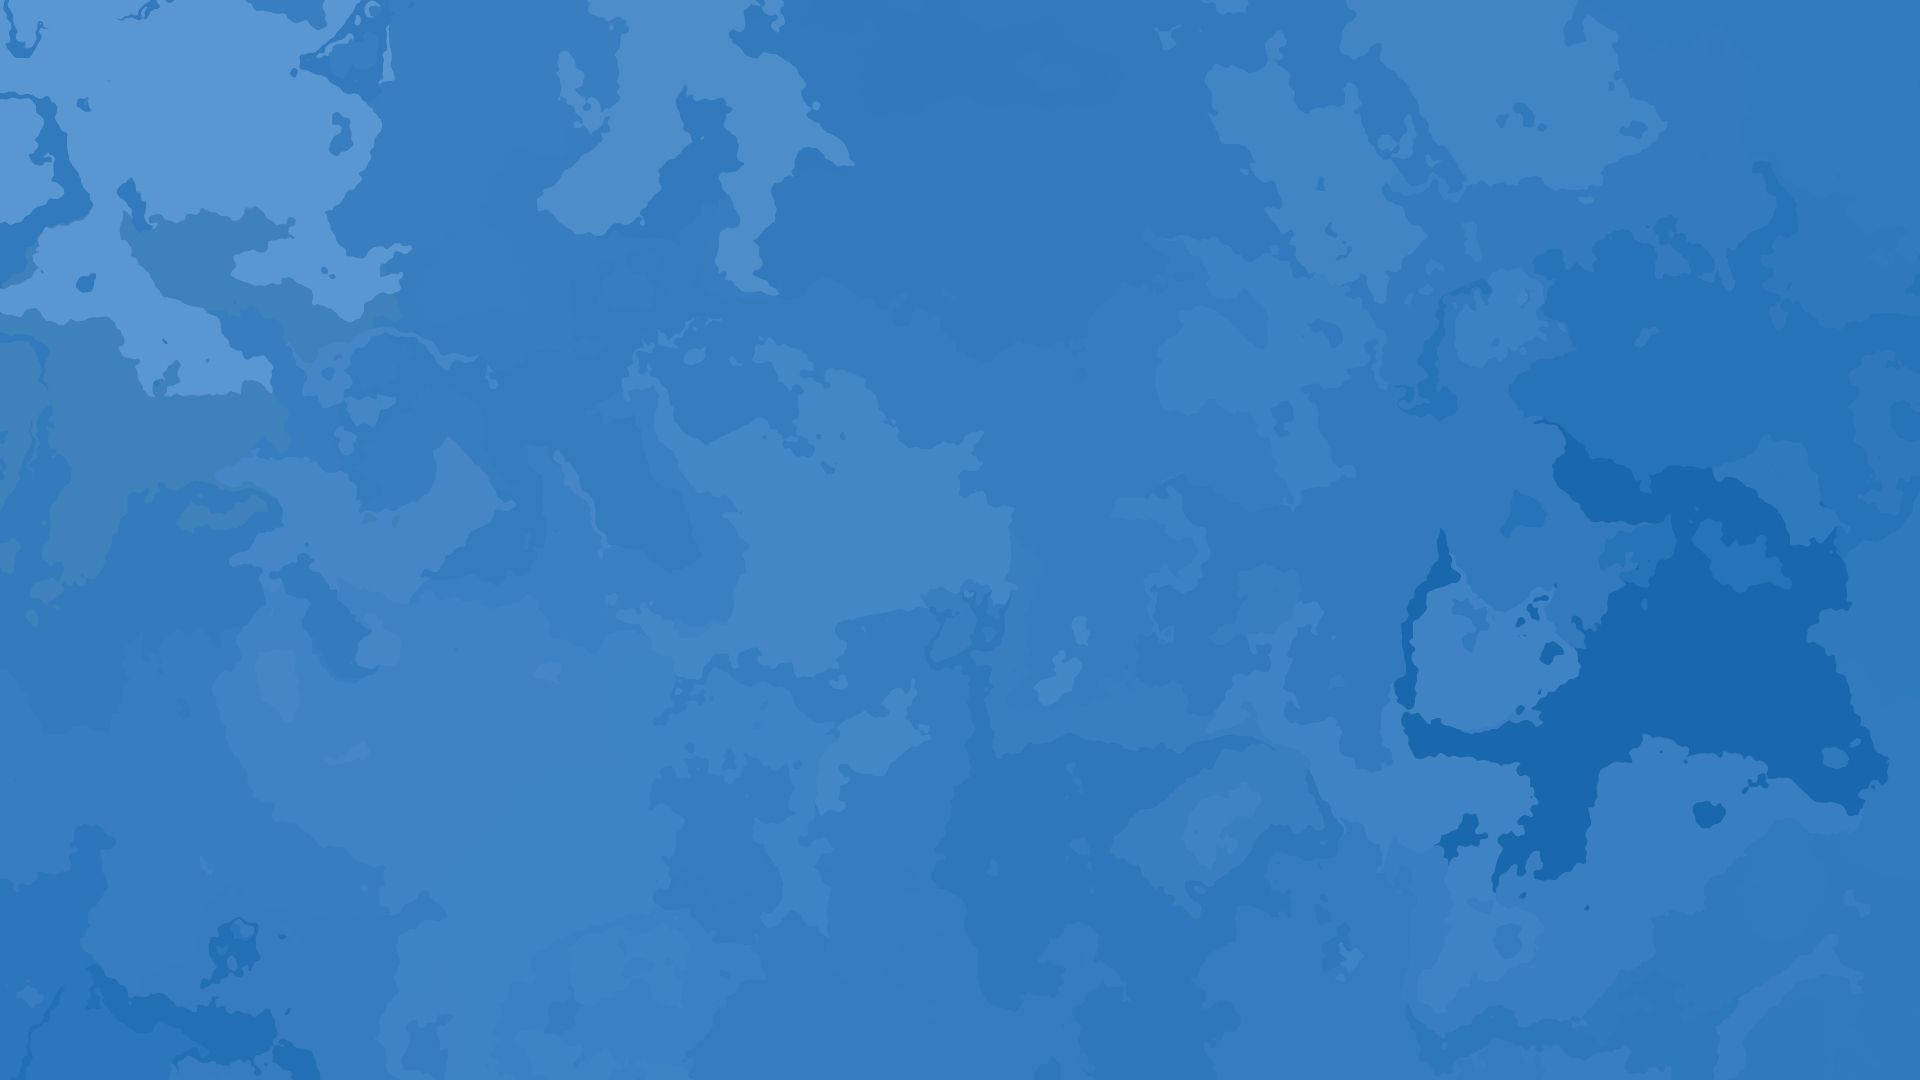 World Map In Plain Blue Background